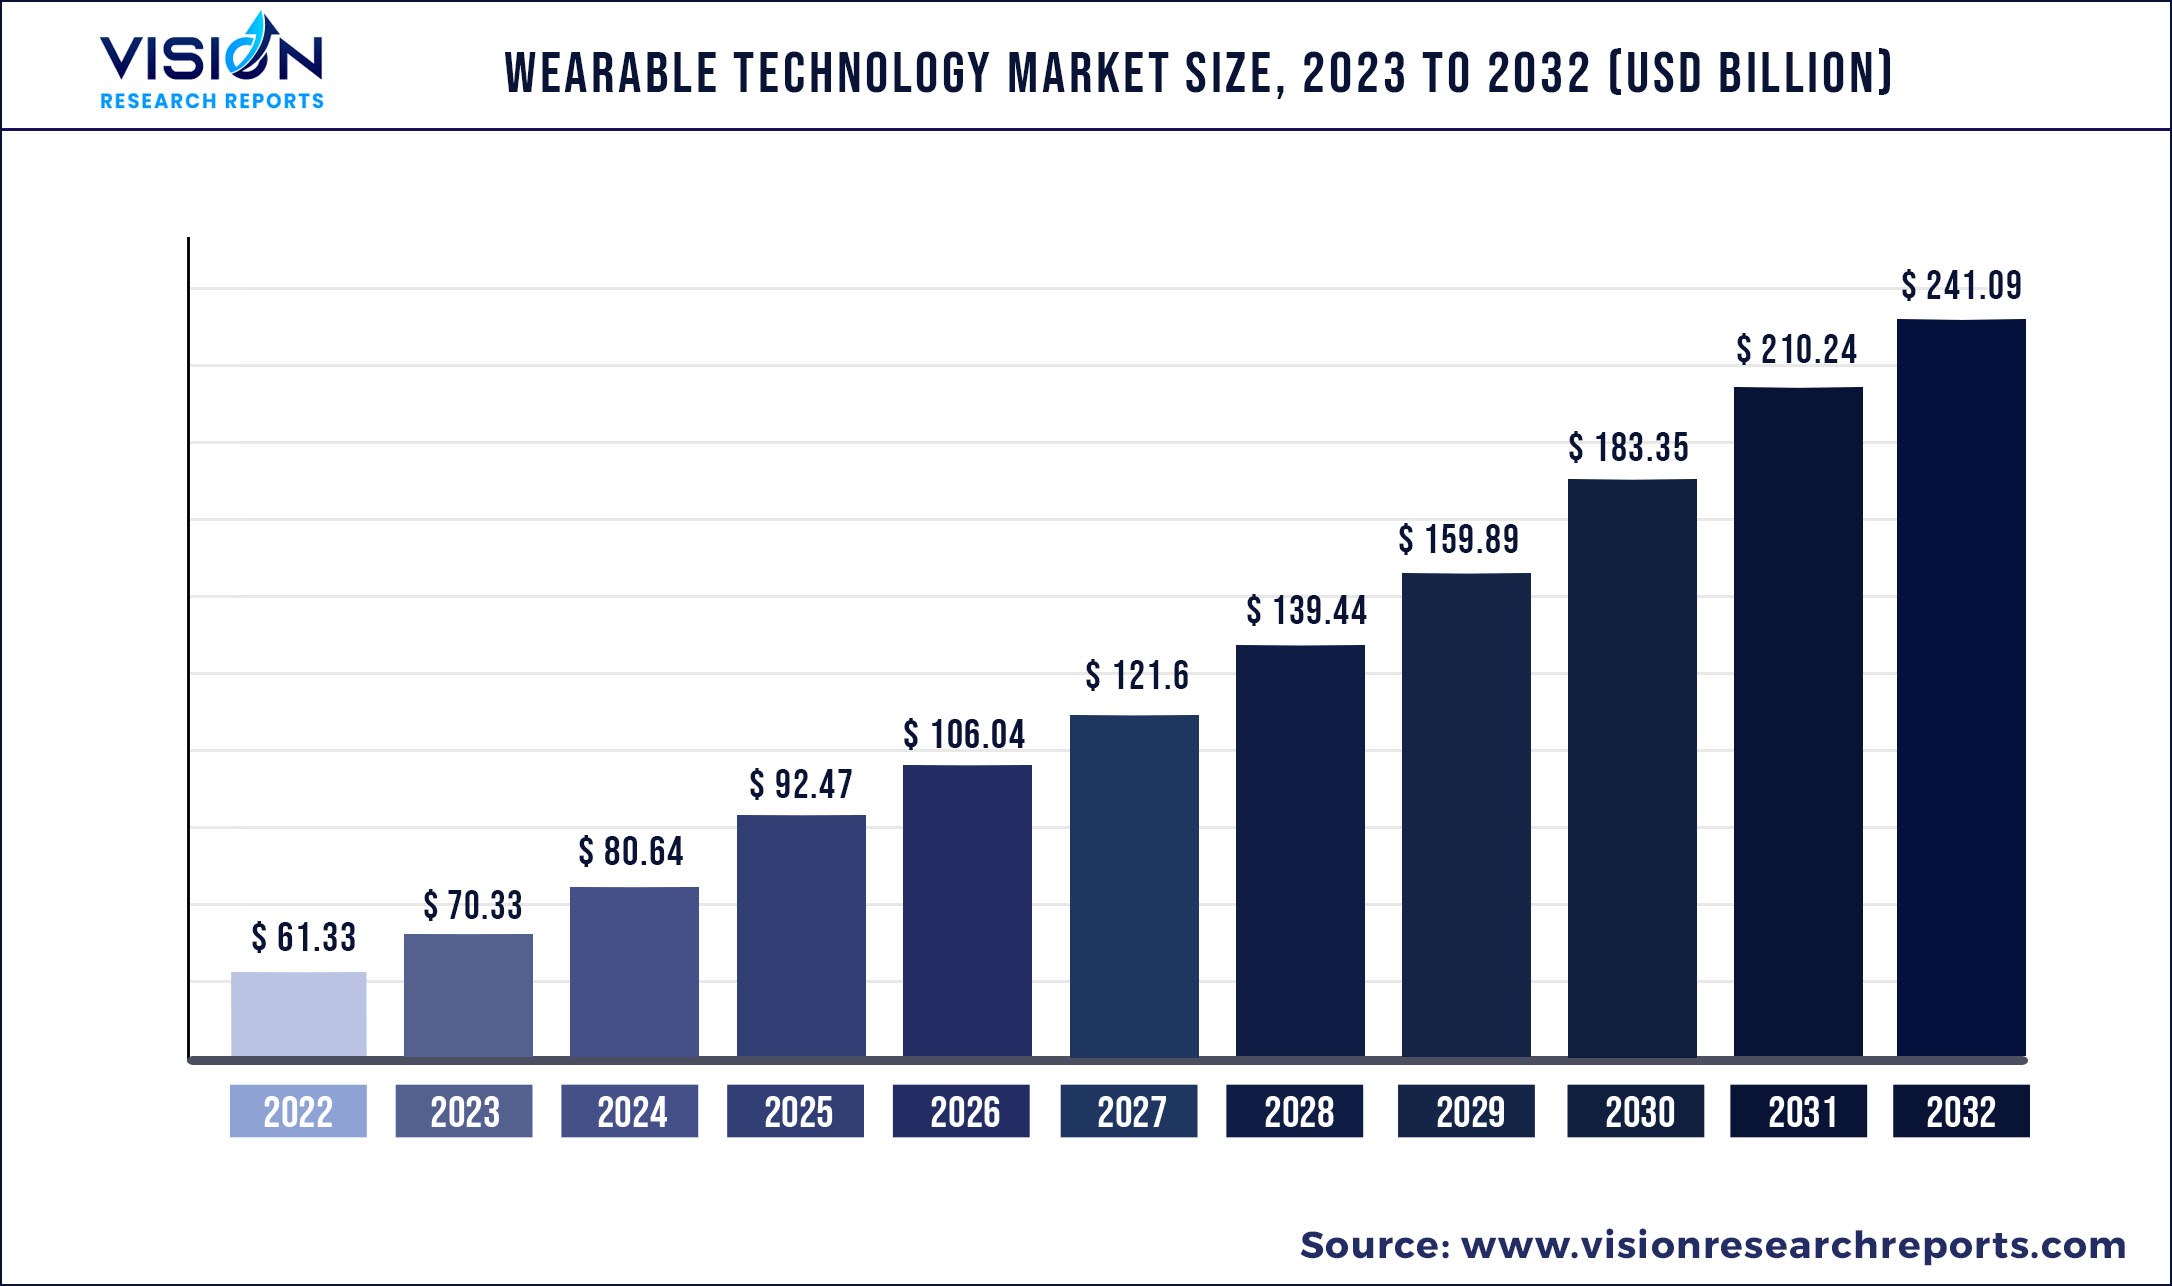 Wearable Technology Market Size 2023 to 2032